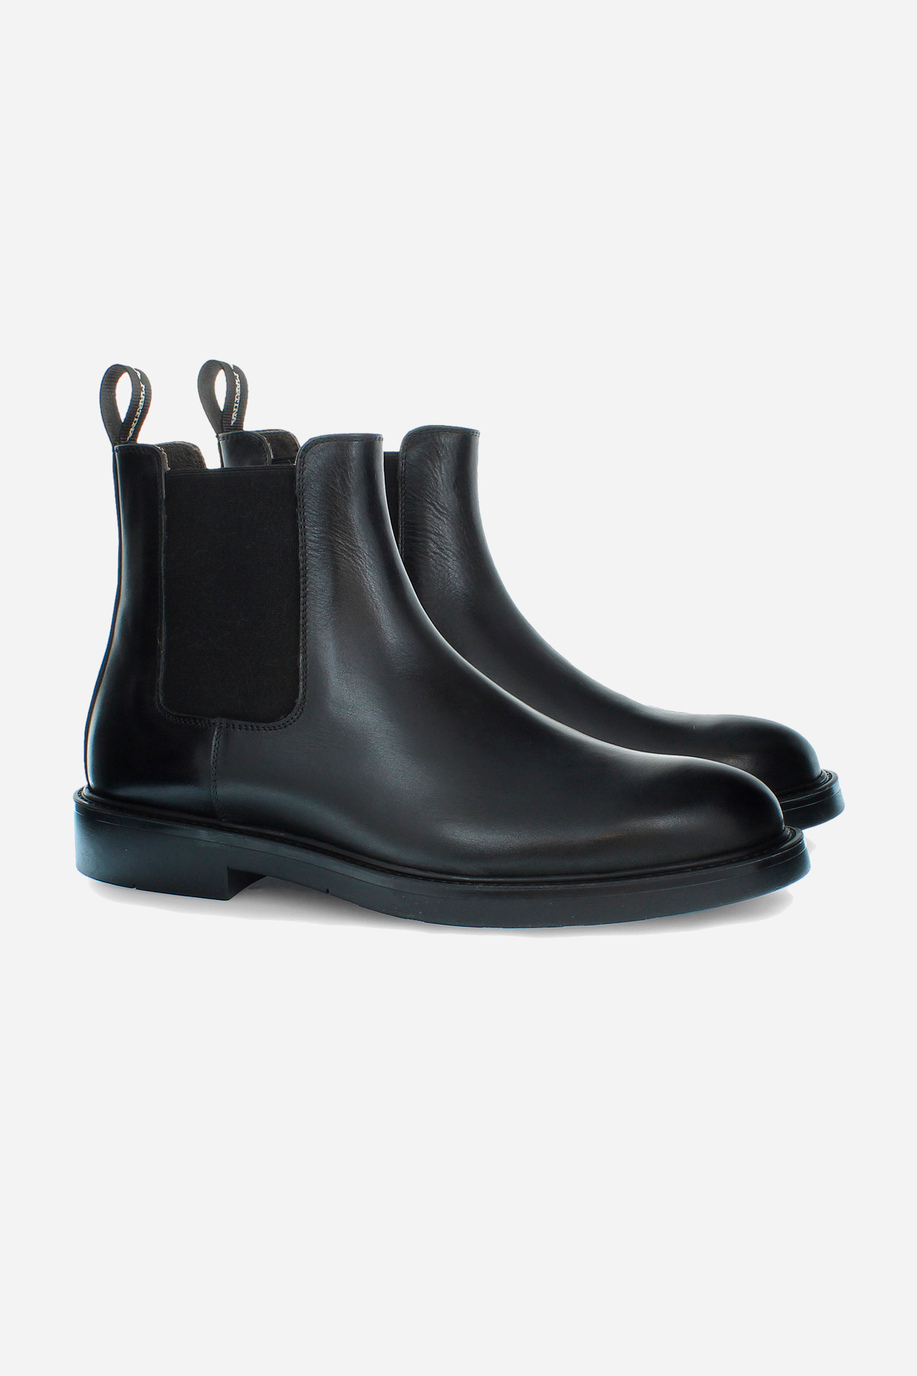 Men’s ankle boot in buttero leather - Formal Shoes | La Martina - Official Online Shop